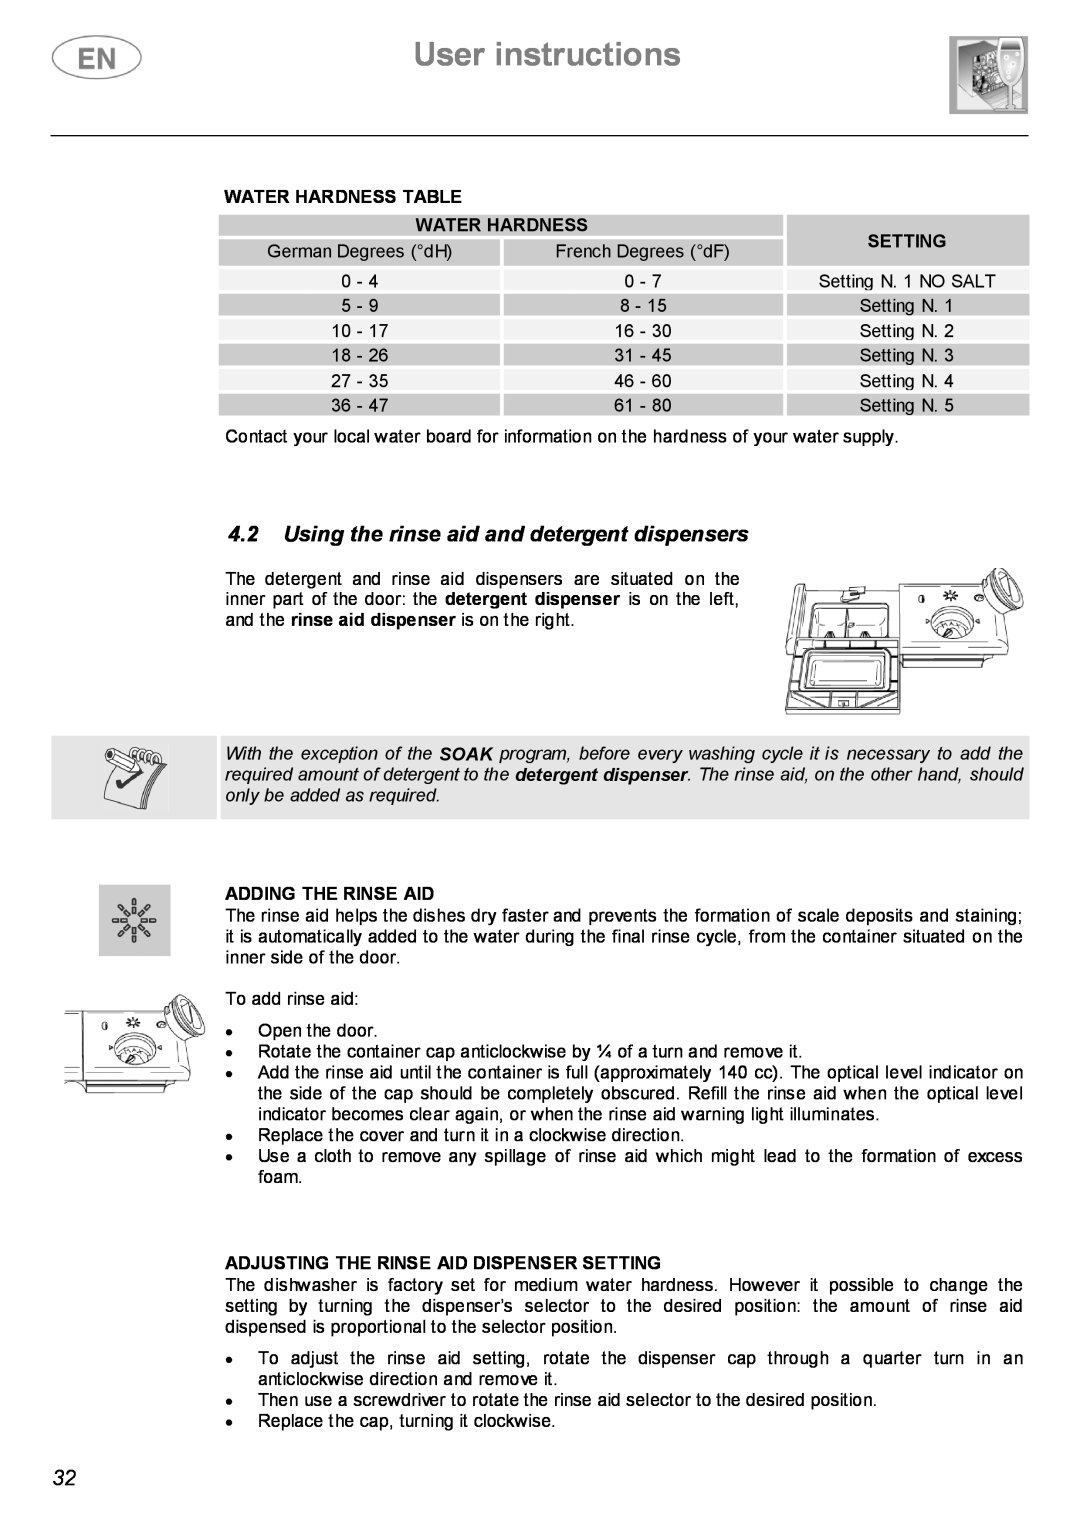 Smeg STX4-3 User instructions, 4.2Using the rinse aid and detergent dispensers, Water Hardness Table, Setting 